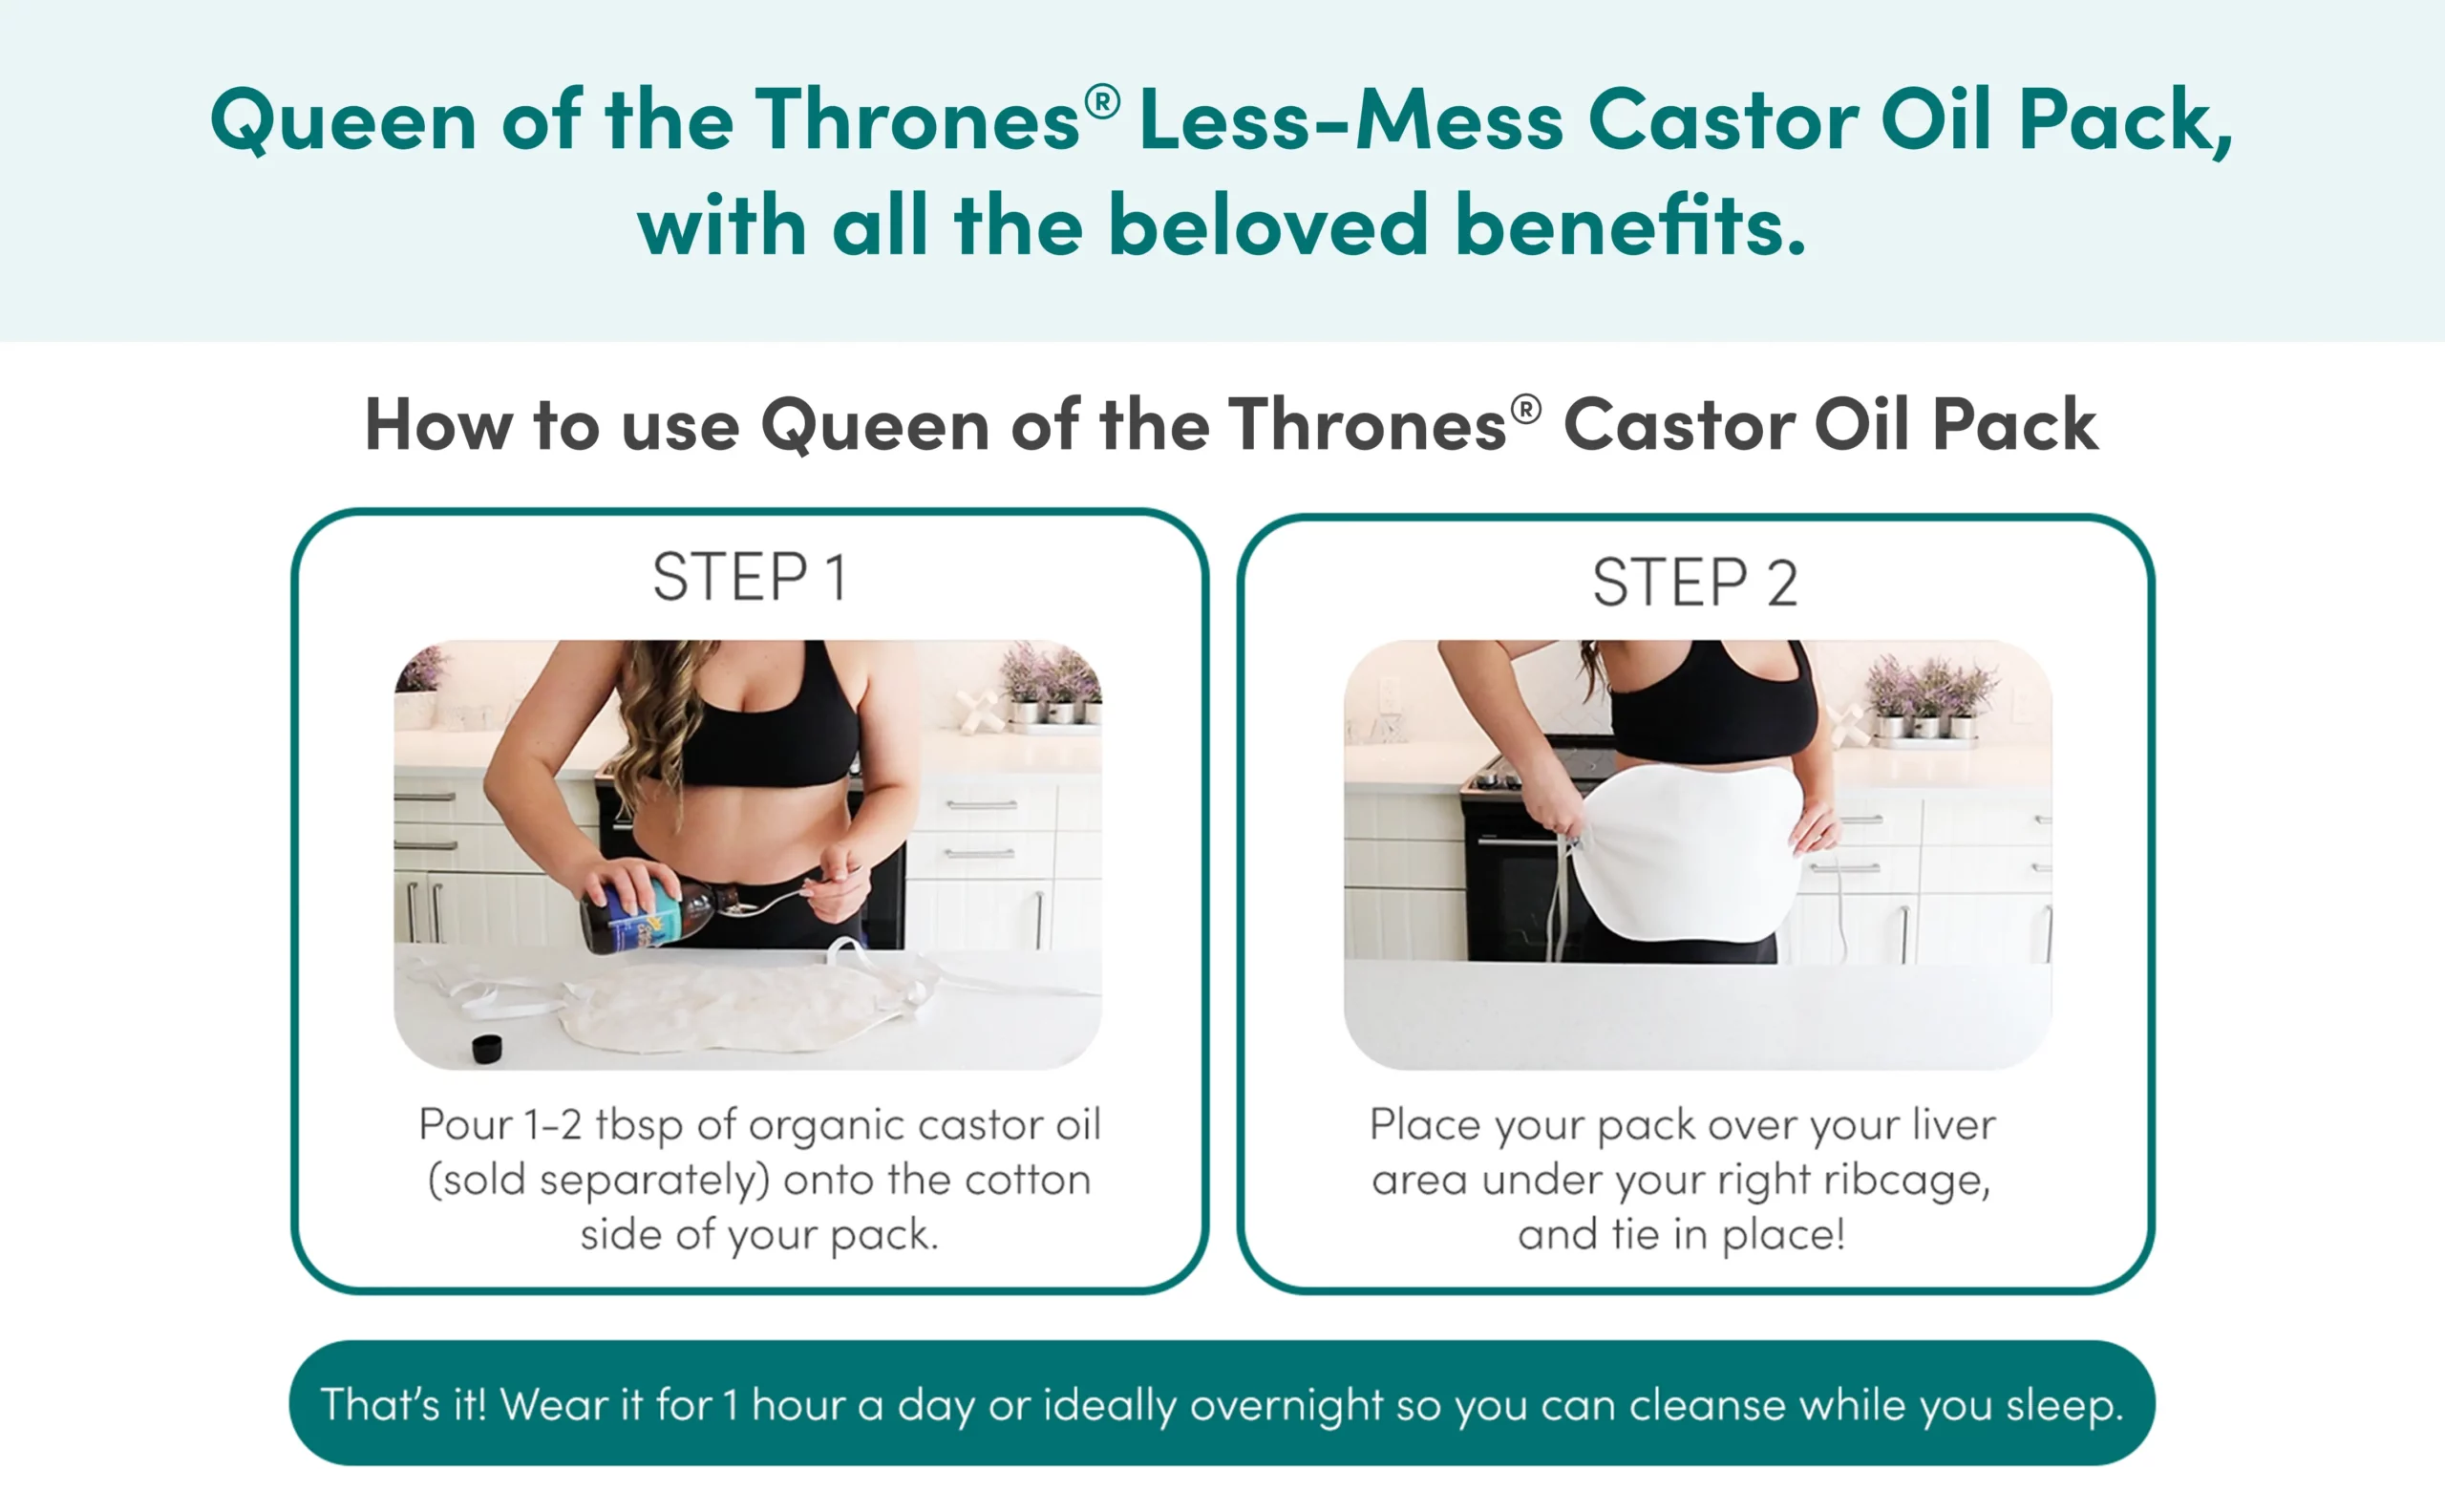 Queen of the Thrones less mess Castor Oil Pack with all the beloved benefits